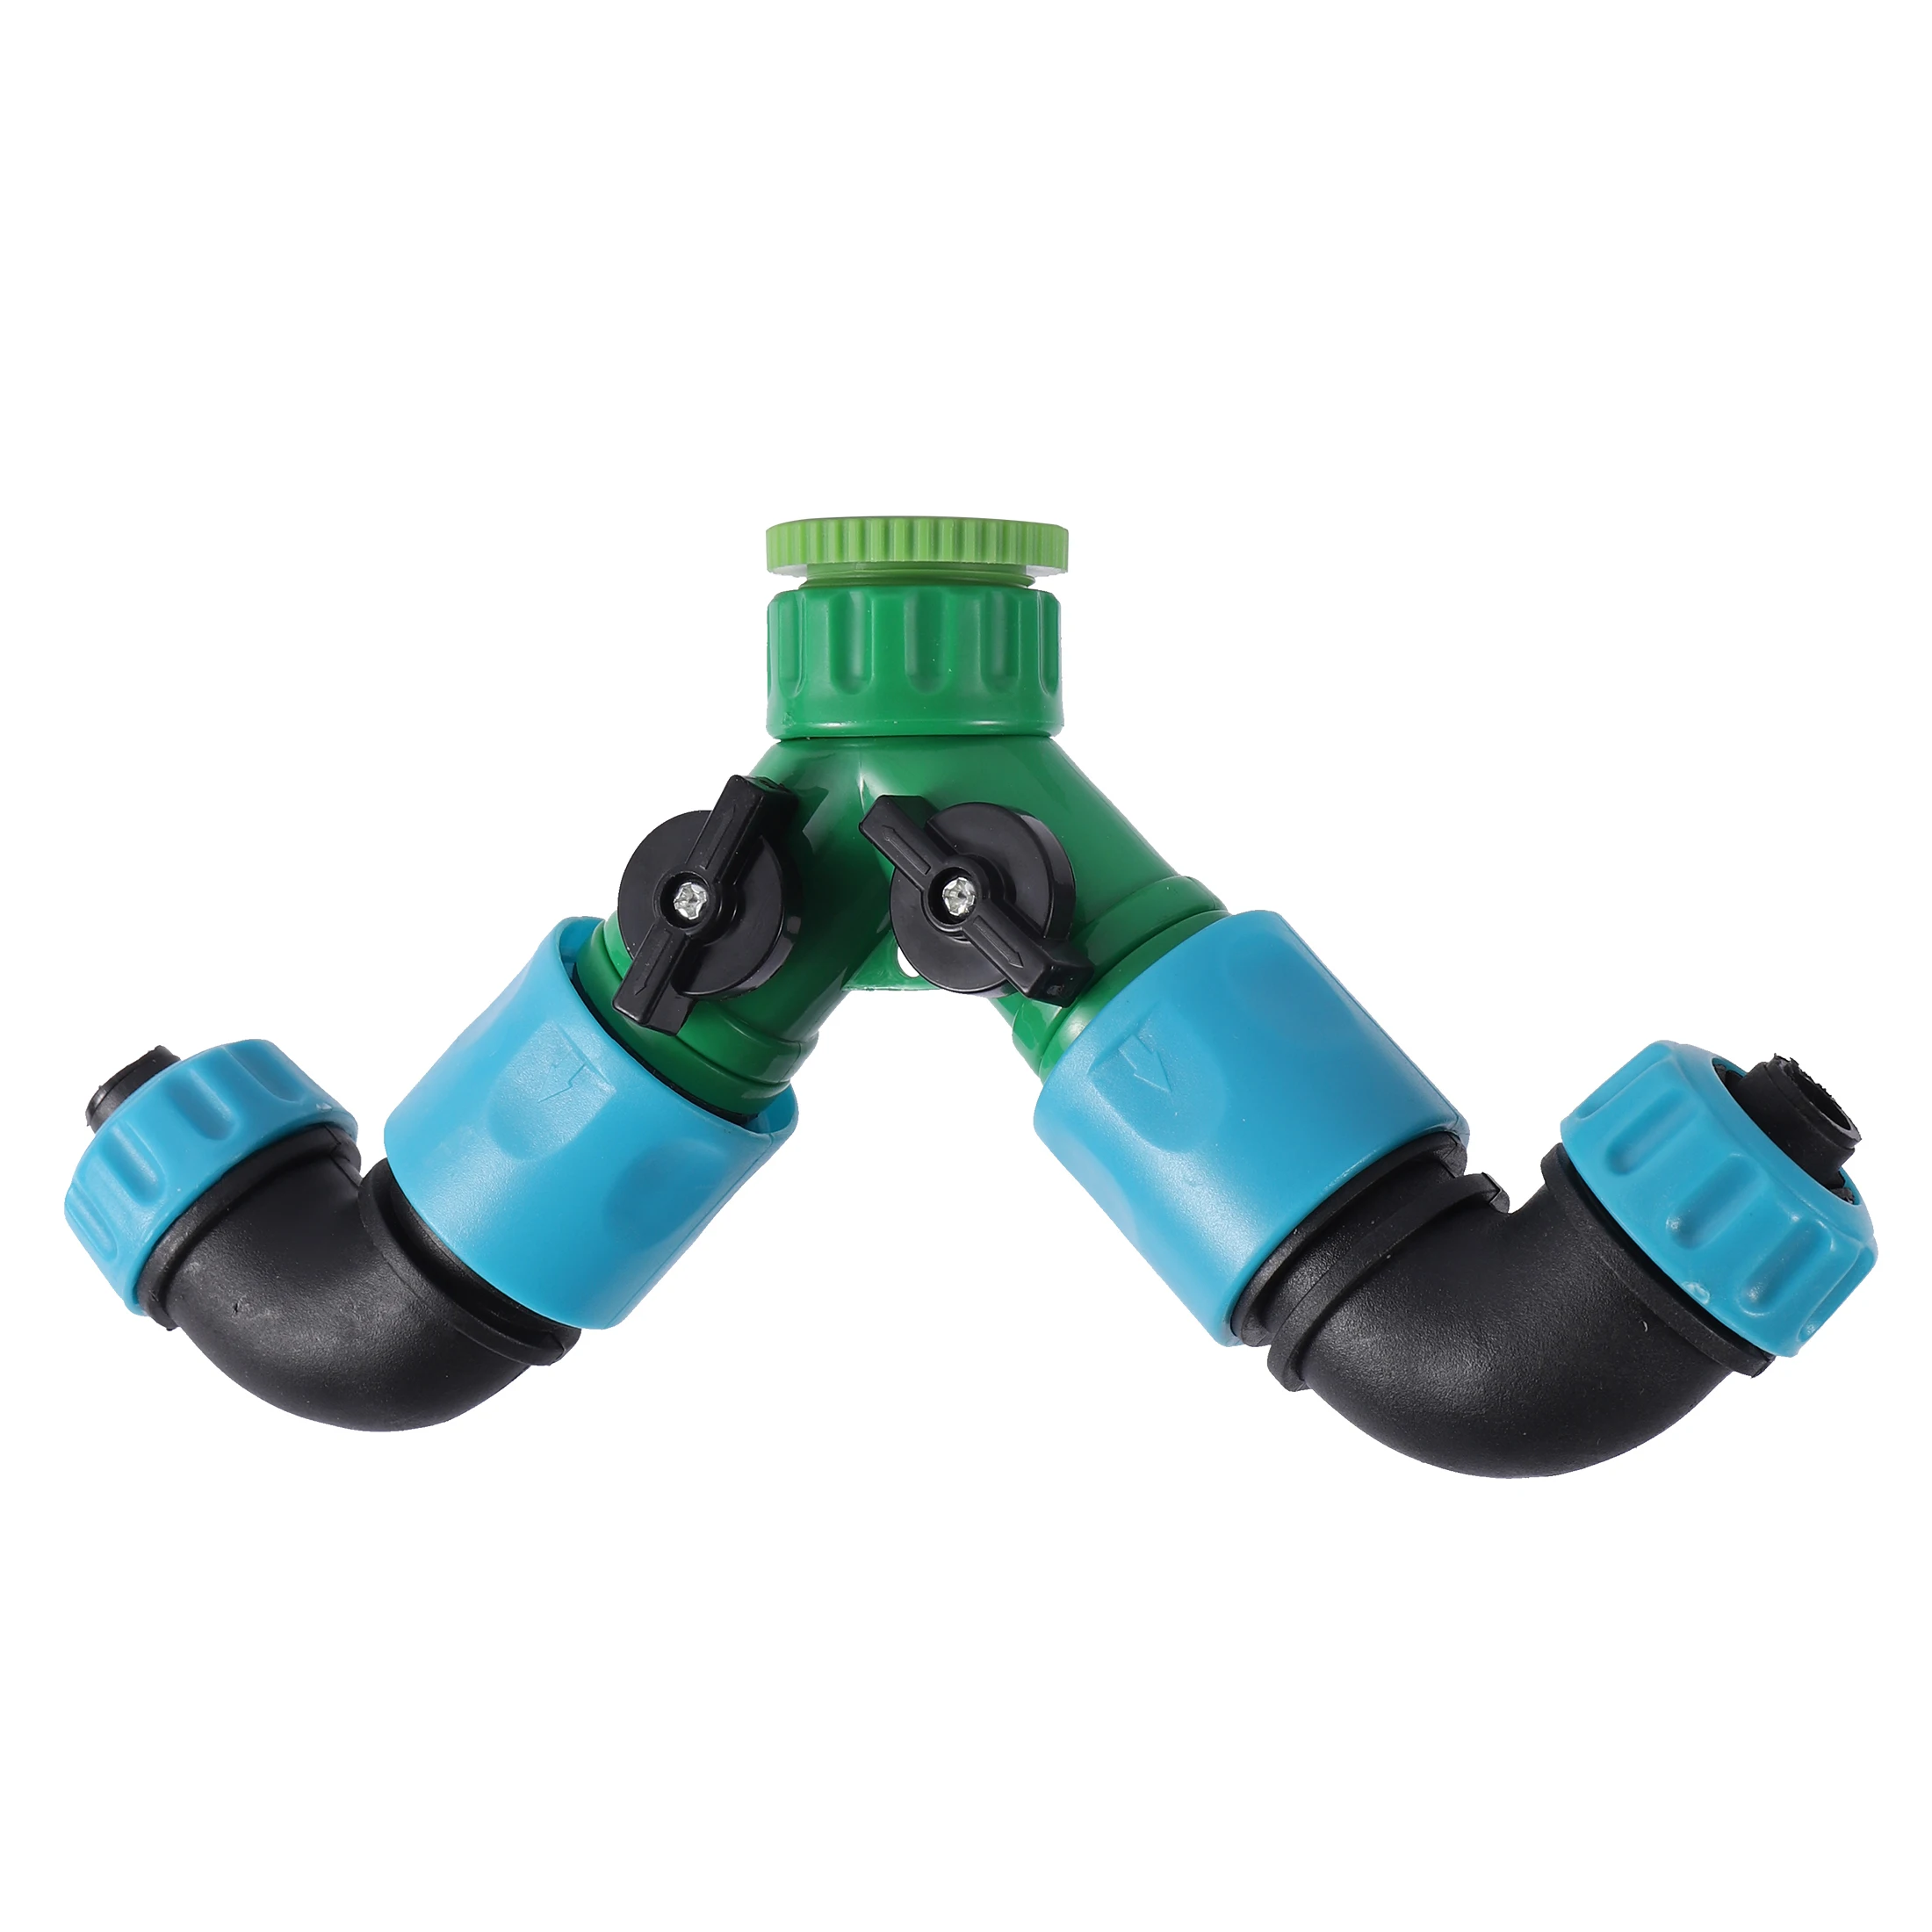 

2-Way Faucet Tap Y Splitter 1/2"3/4" Thread Convert 16mm Pipe Garden Irrigation Water Supply Distribution Quick Connection Valve